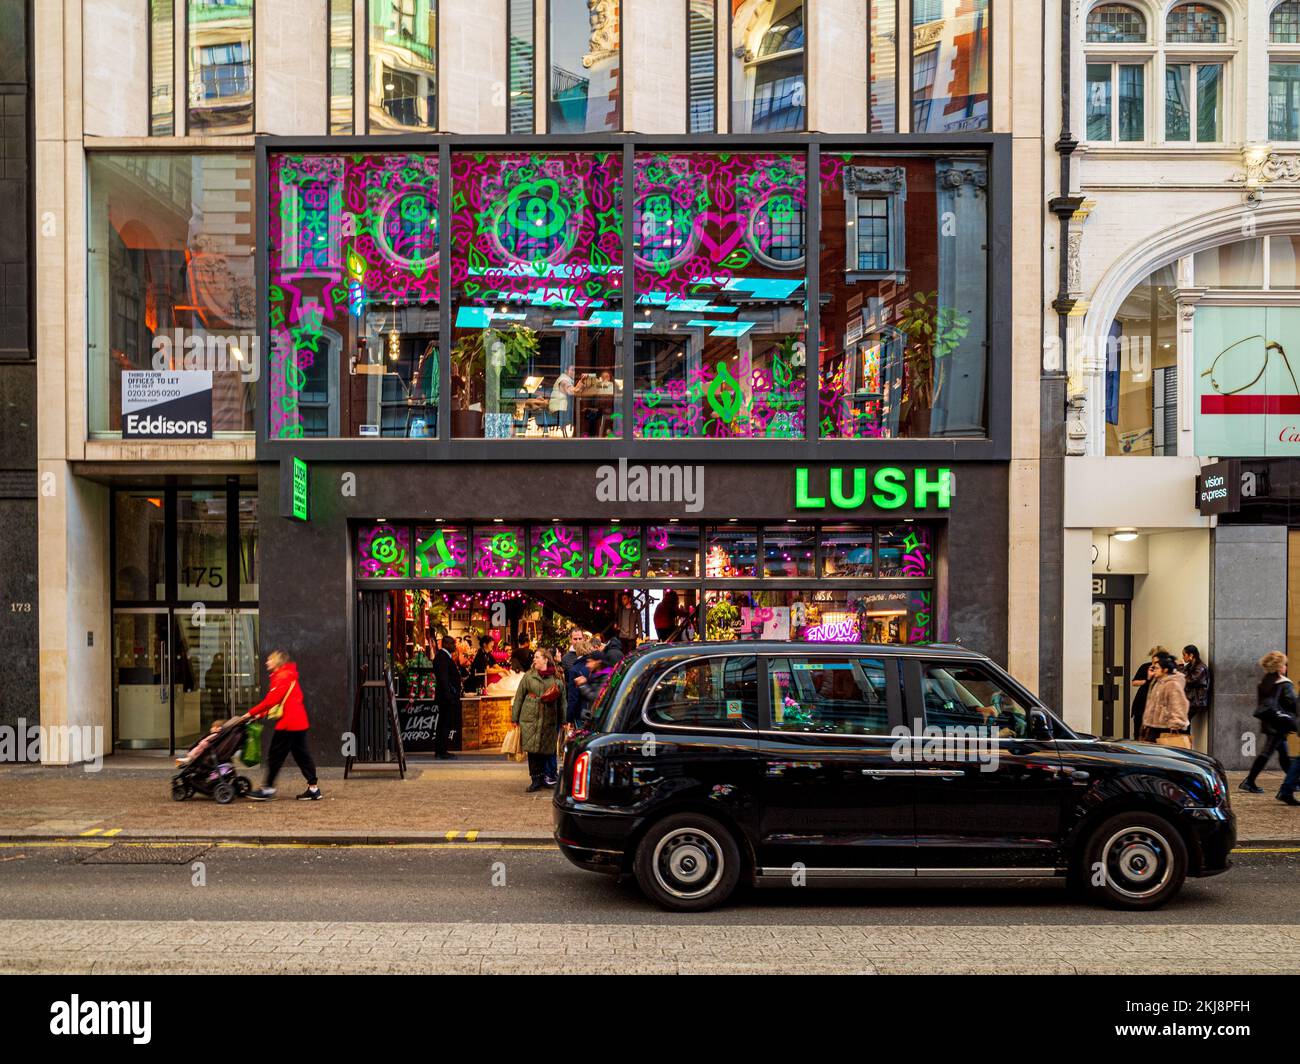 Lush Spa Oxford Street London - Flagship Lush Store on Oxford St Central London containing retail space and Spa. Lush was founded in 1995. Stock Photo